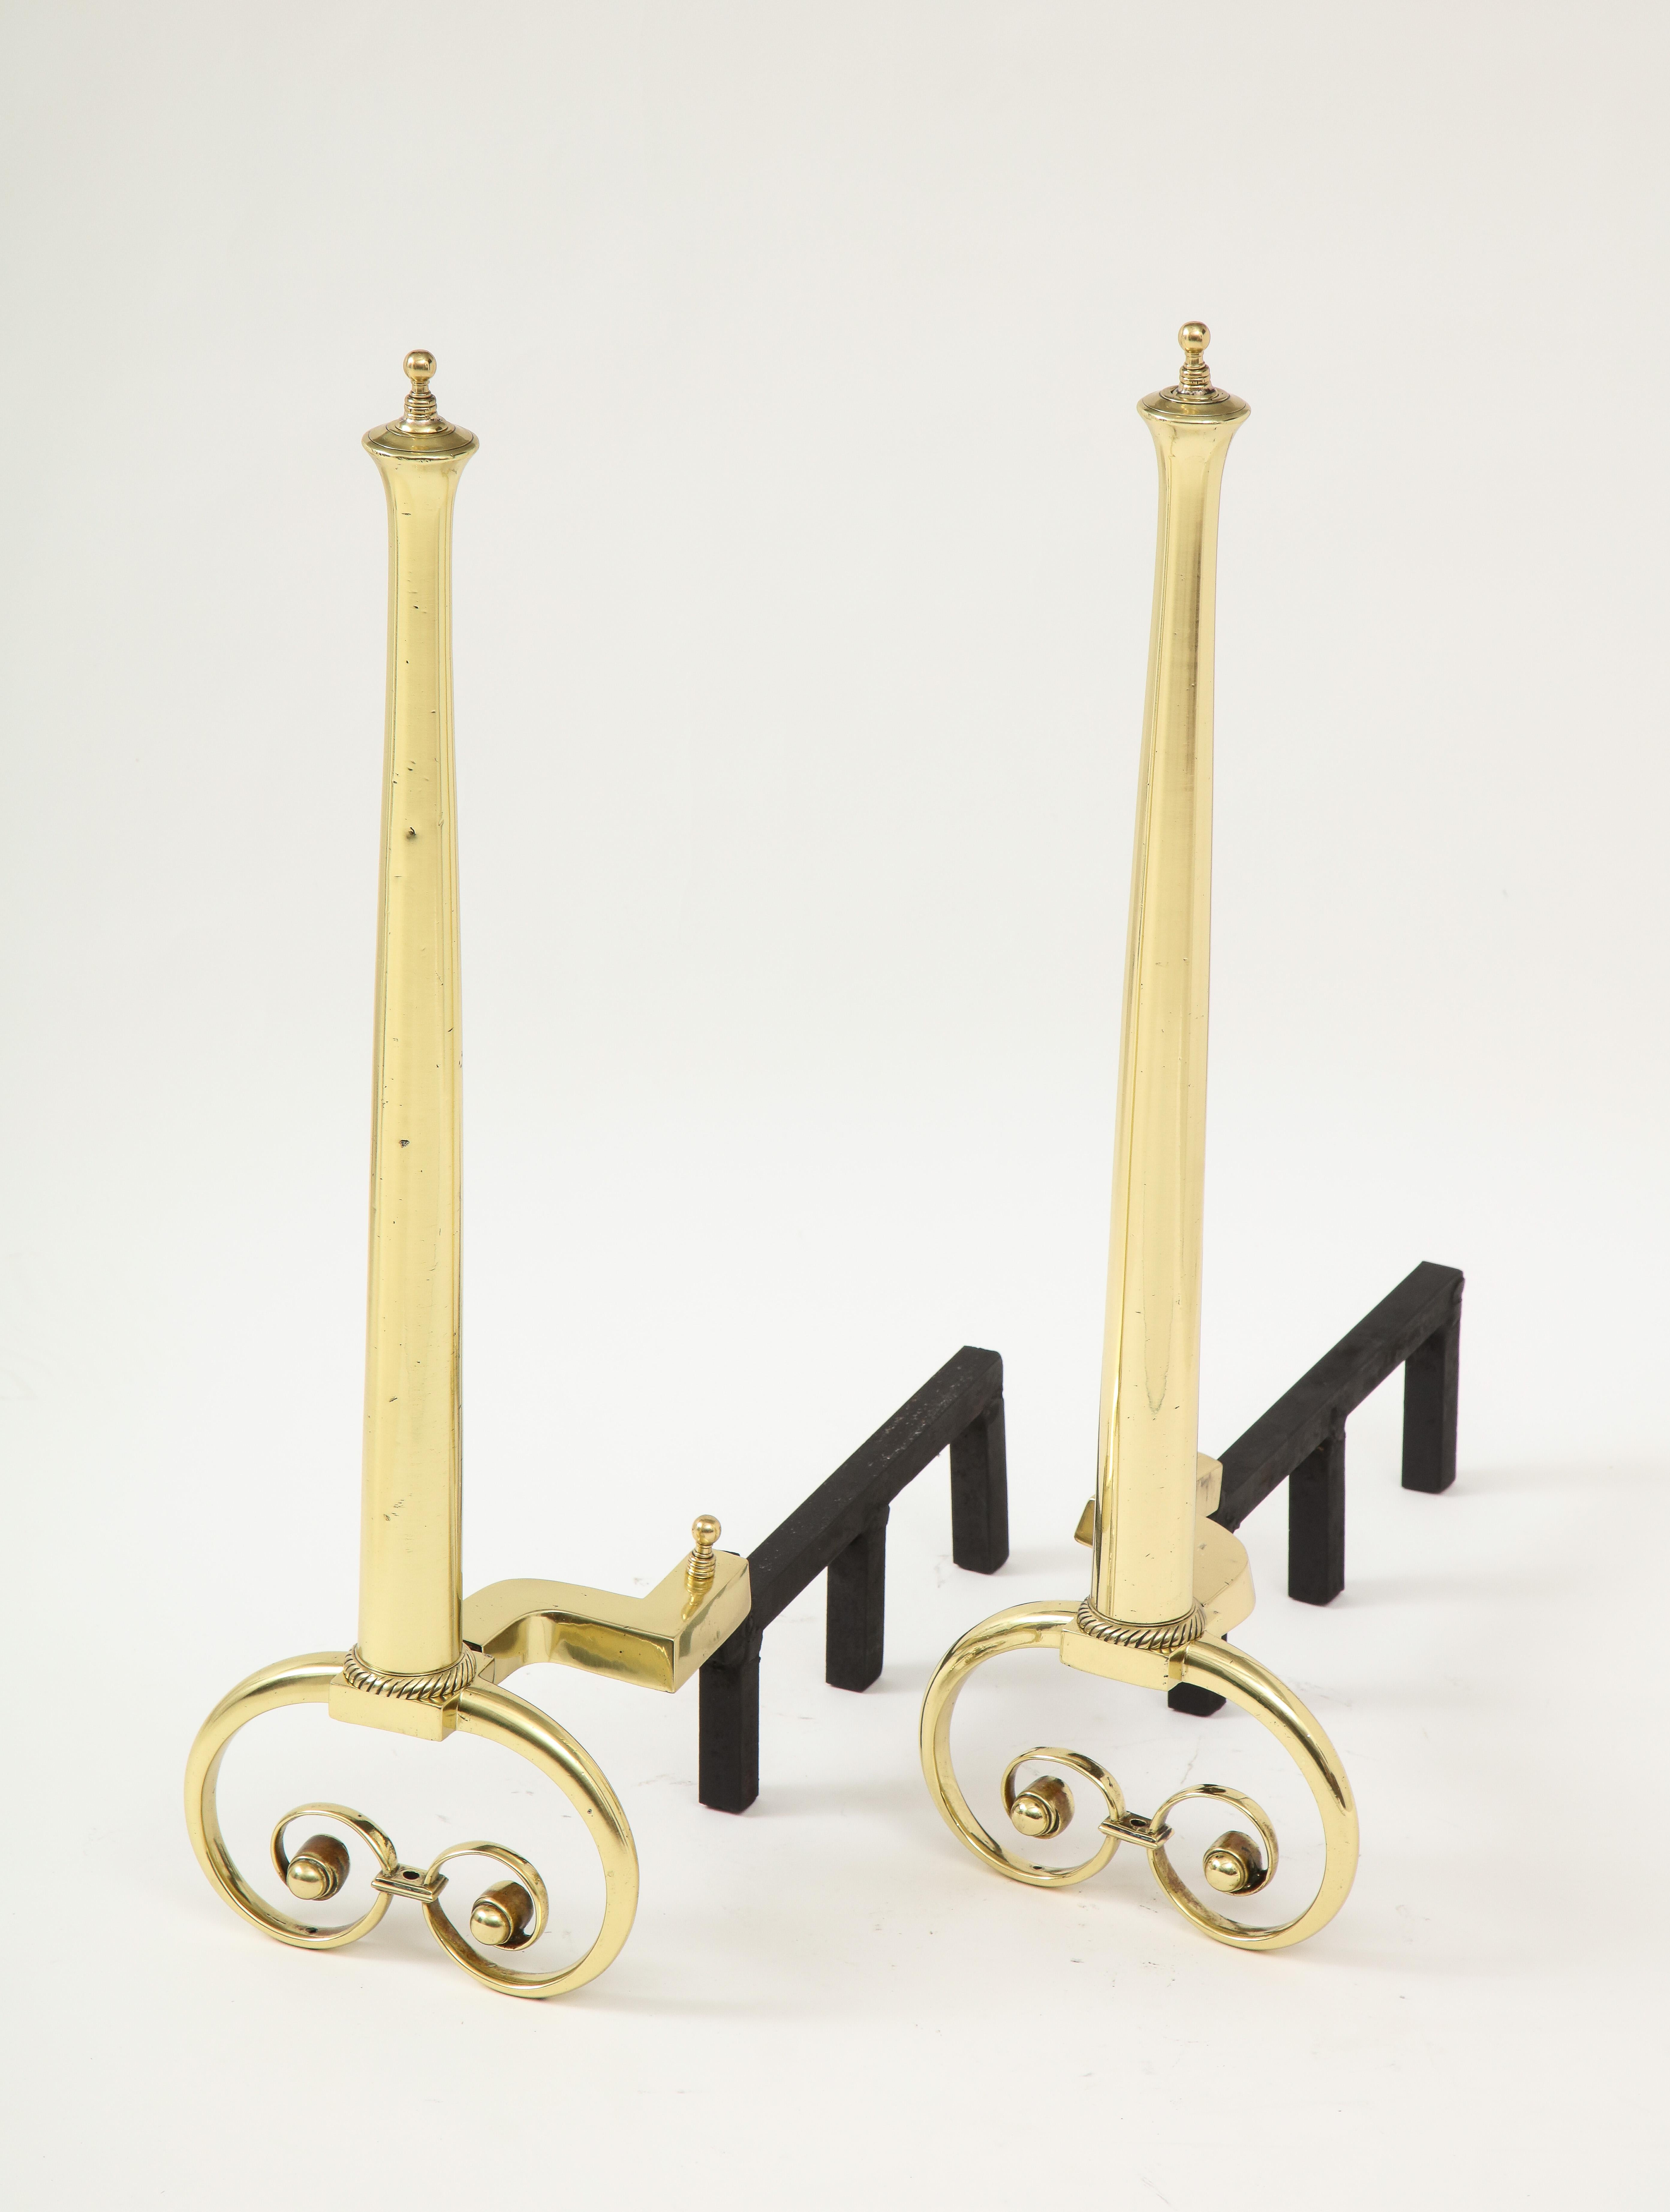 Pair of tapering brass Art Nouveau andirons ending with scrolled feet, circa 1930s.